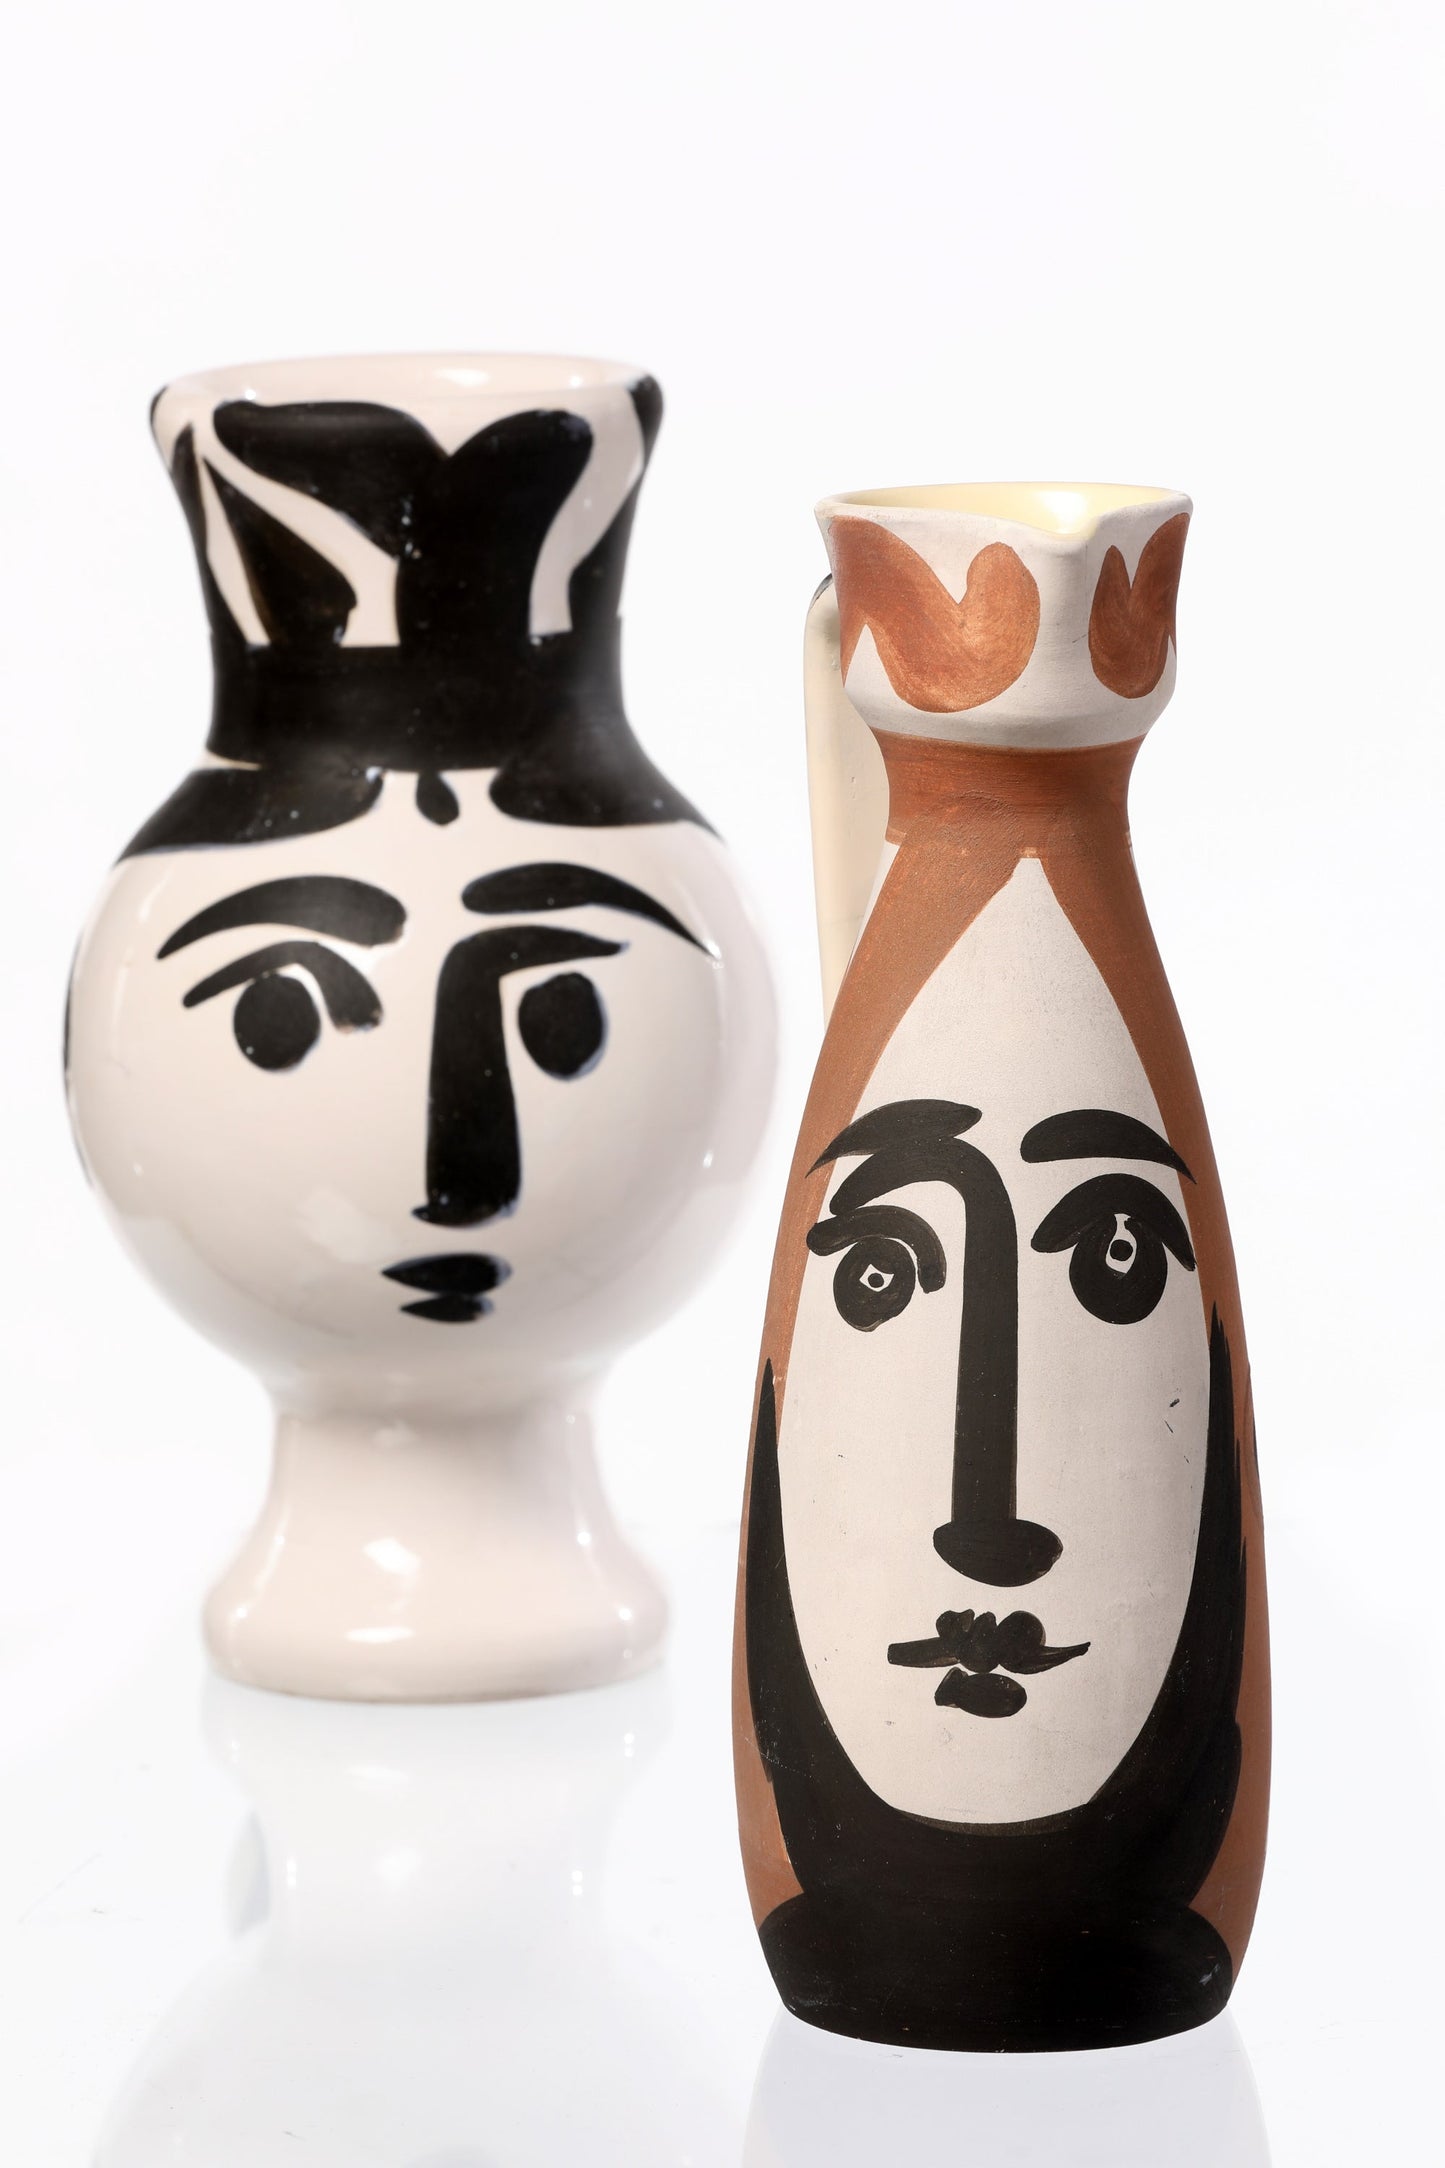 Pablo Picasso vase for Madoura Femme Chouette 1951